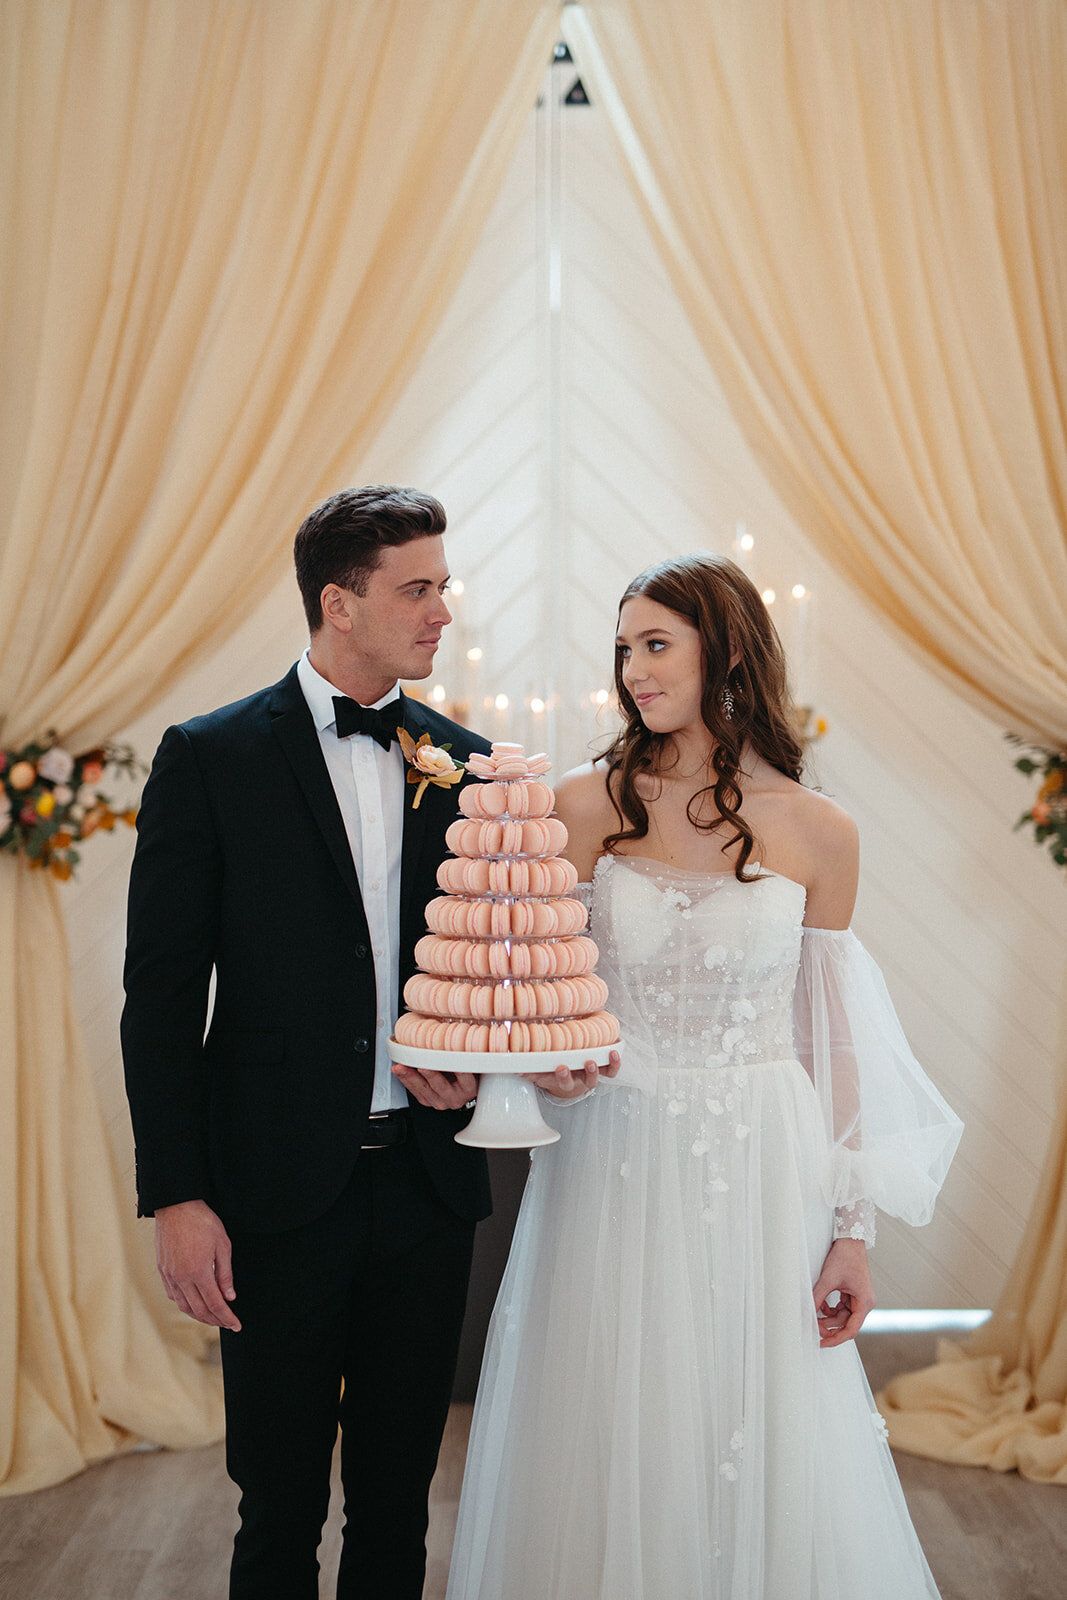 Bride and groom wearing a white wedding gown and black tuxedo holding a cake stand filled with blush macaroons.